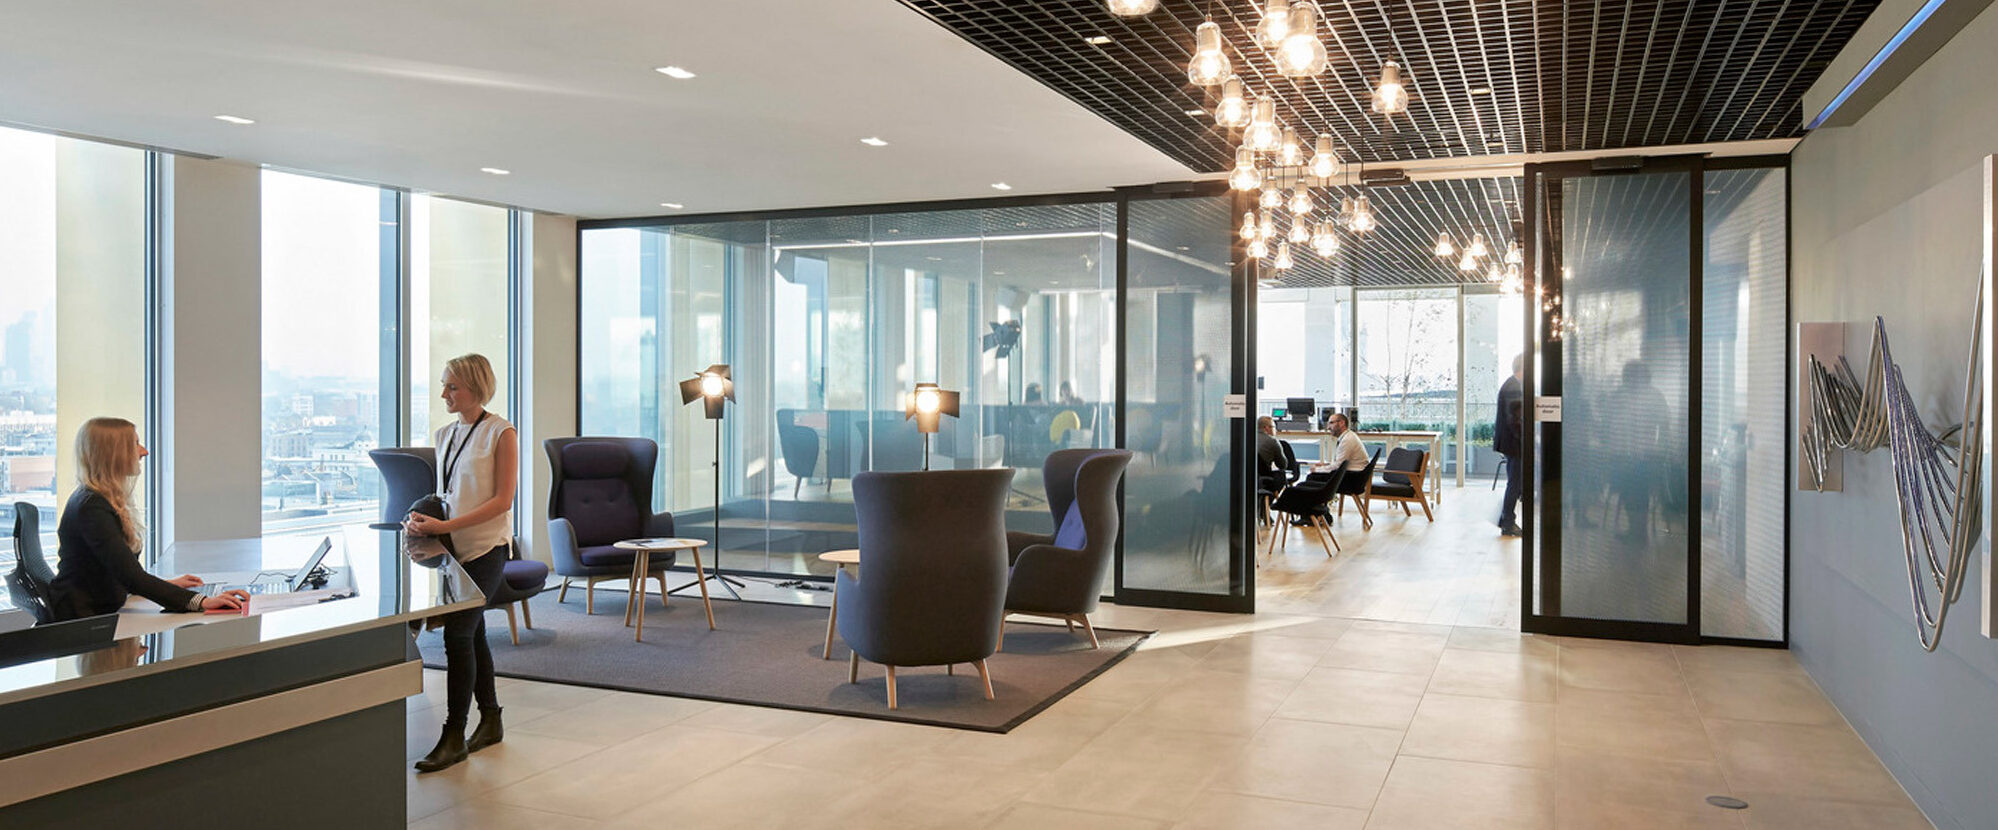 Modern office space showcasing an open layout with expansive windows offering cityscape views. A variety of blue armchairs and a sleek reception desk establish a professional, welcoming ambiance, complemented by unique geometric ceiling lights and discreet glass partitions.